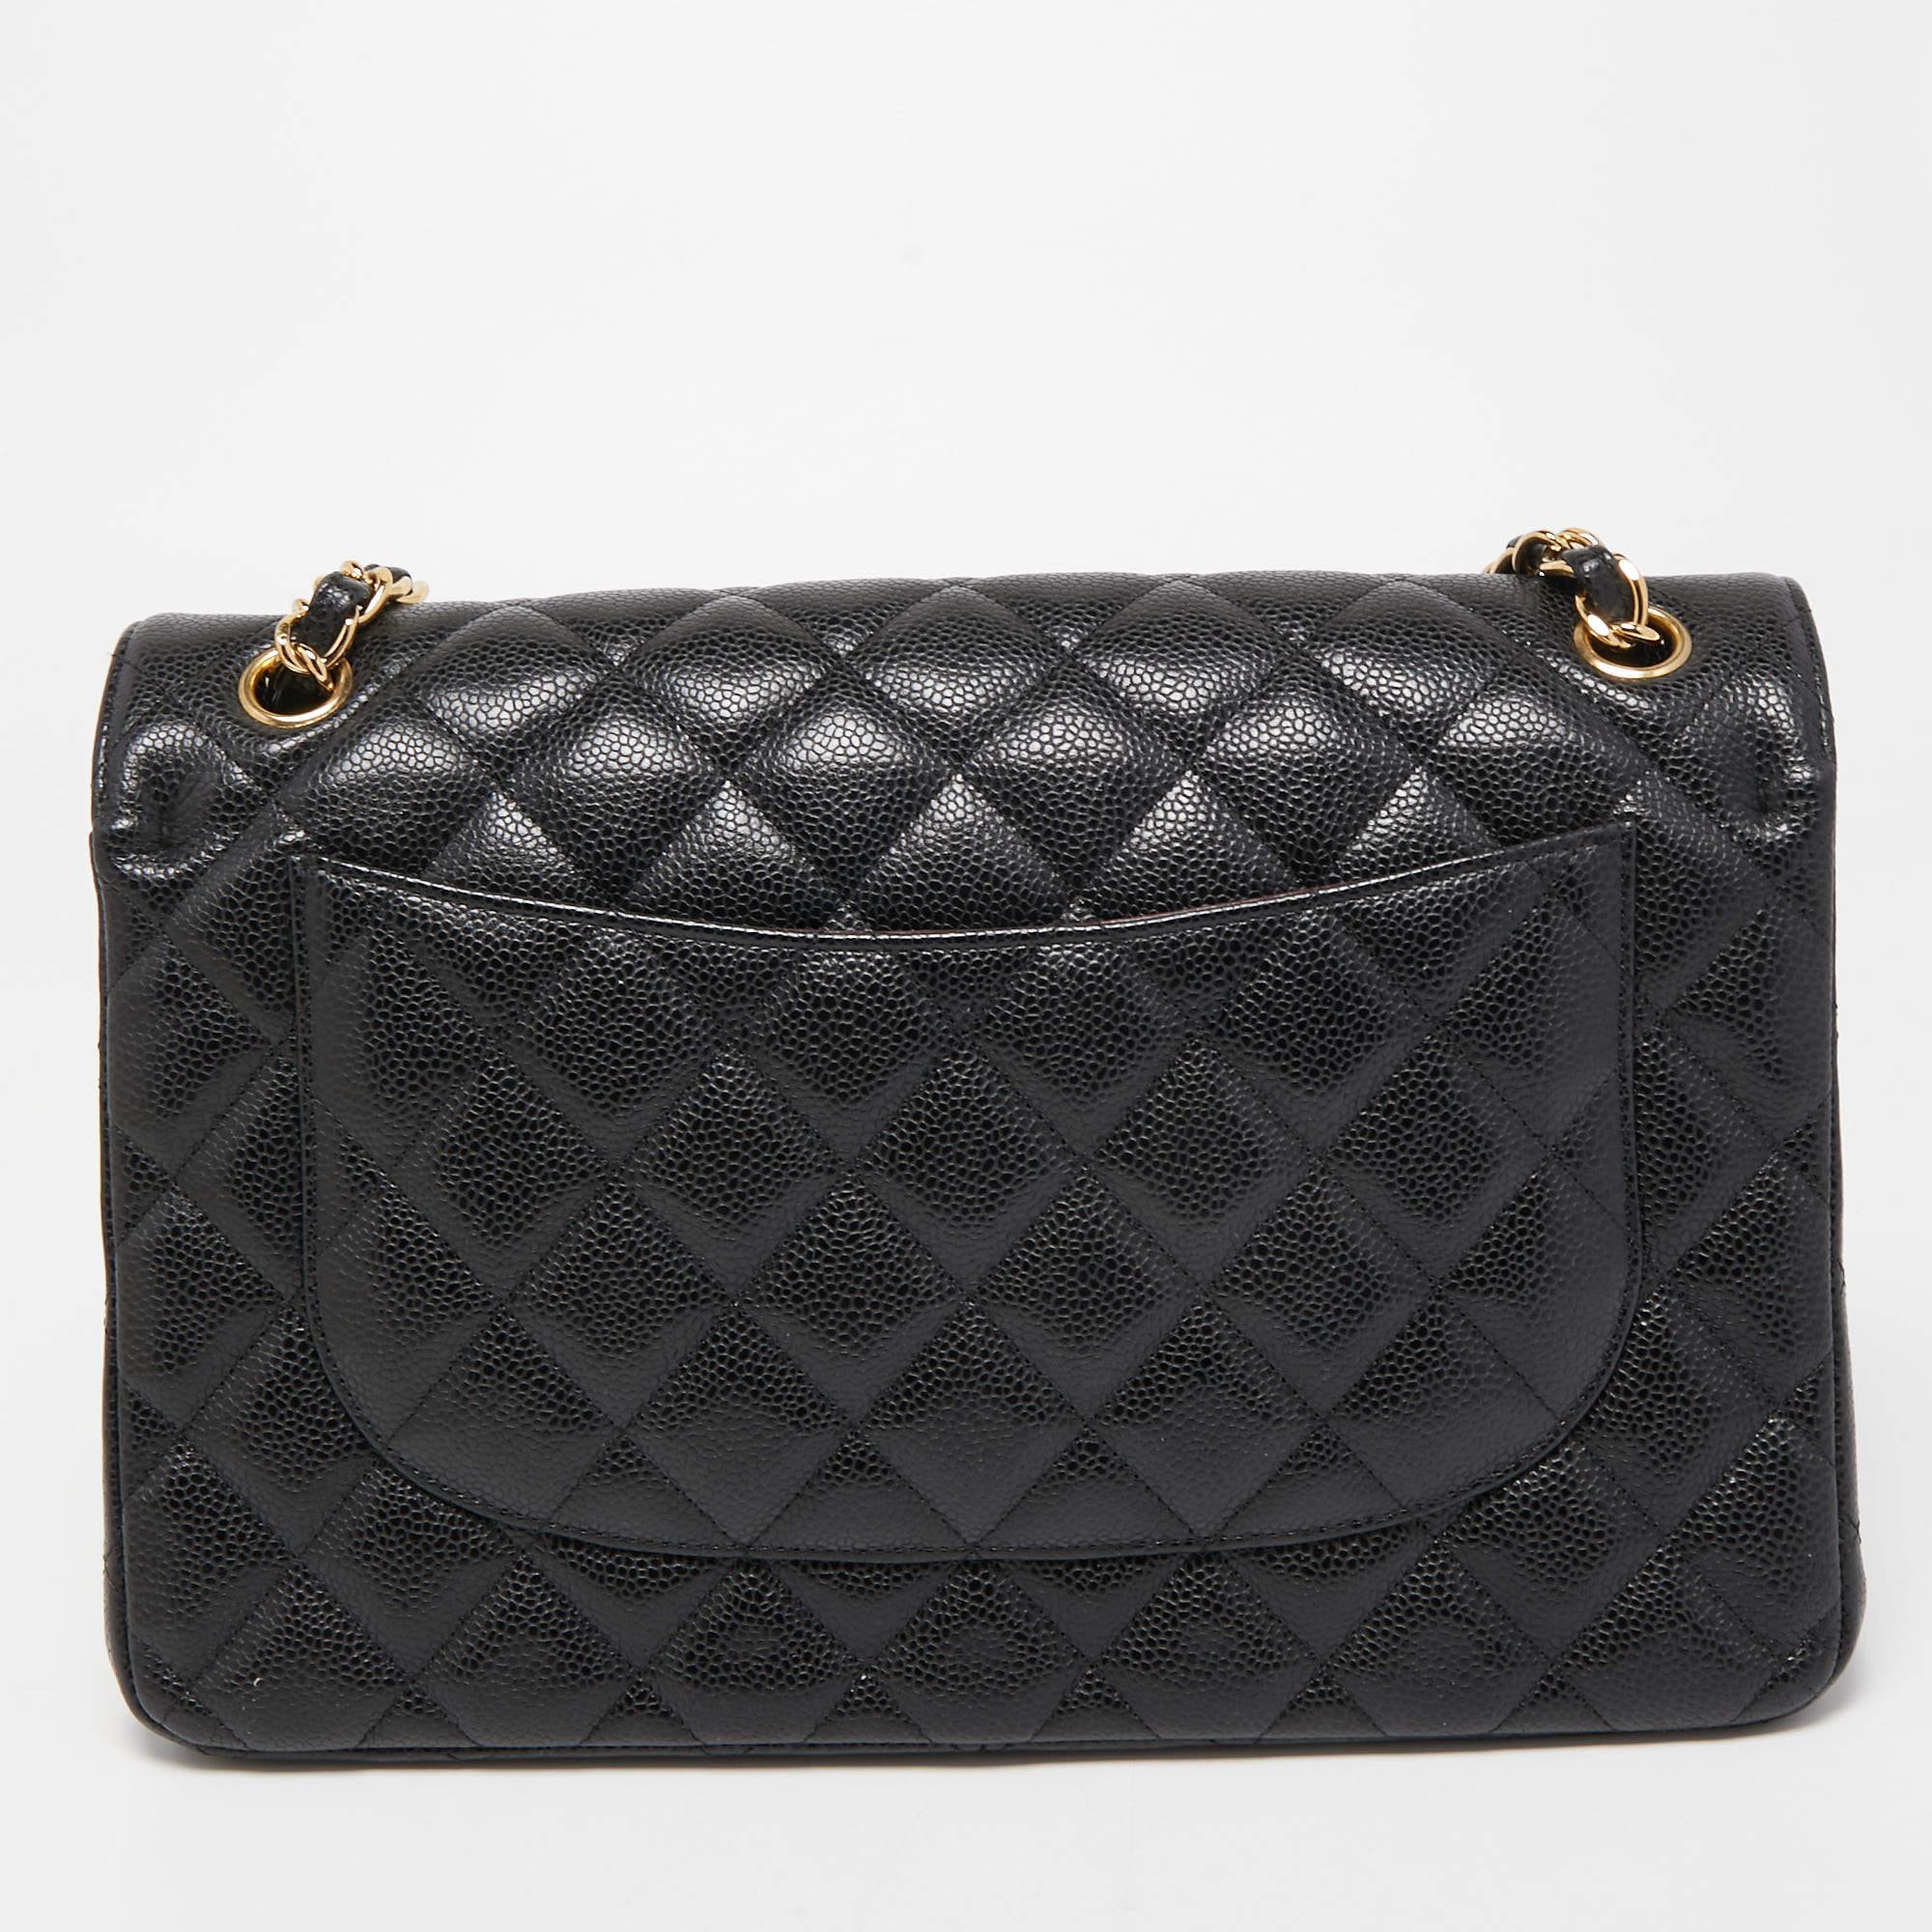 This bag from the house of Chanel is an accessory you would go to season after season. It has been crafted using quilted lambskin leather to be attractive as well as durable. It's a worthy investment.

Includes: Original Dustbag
